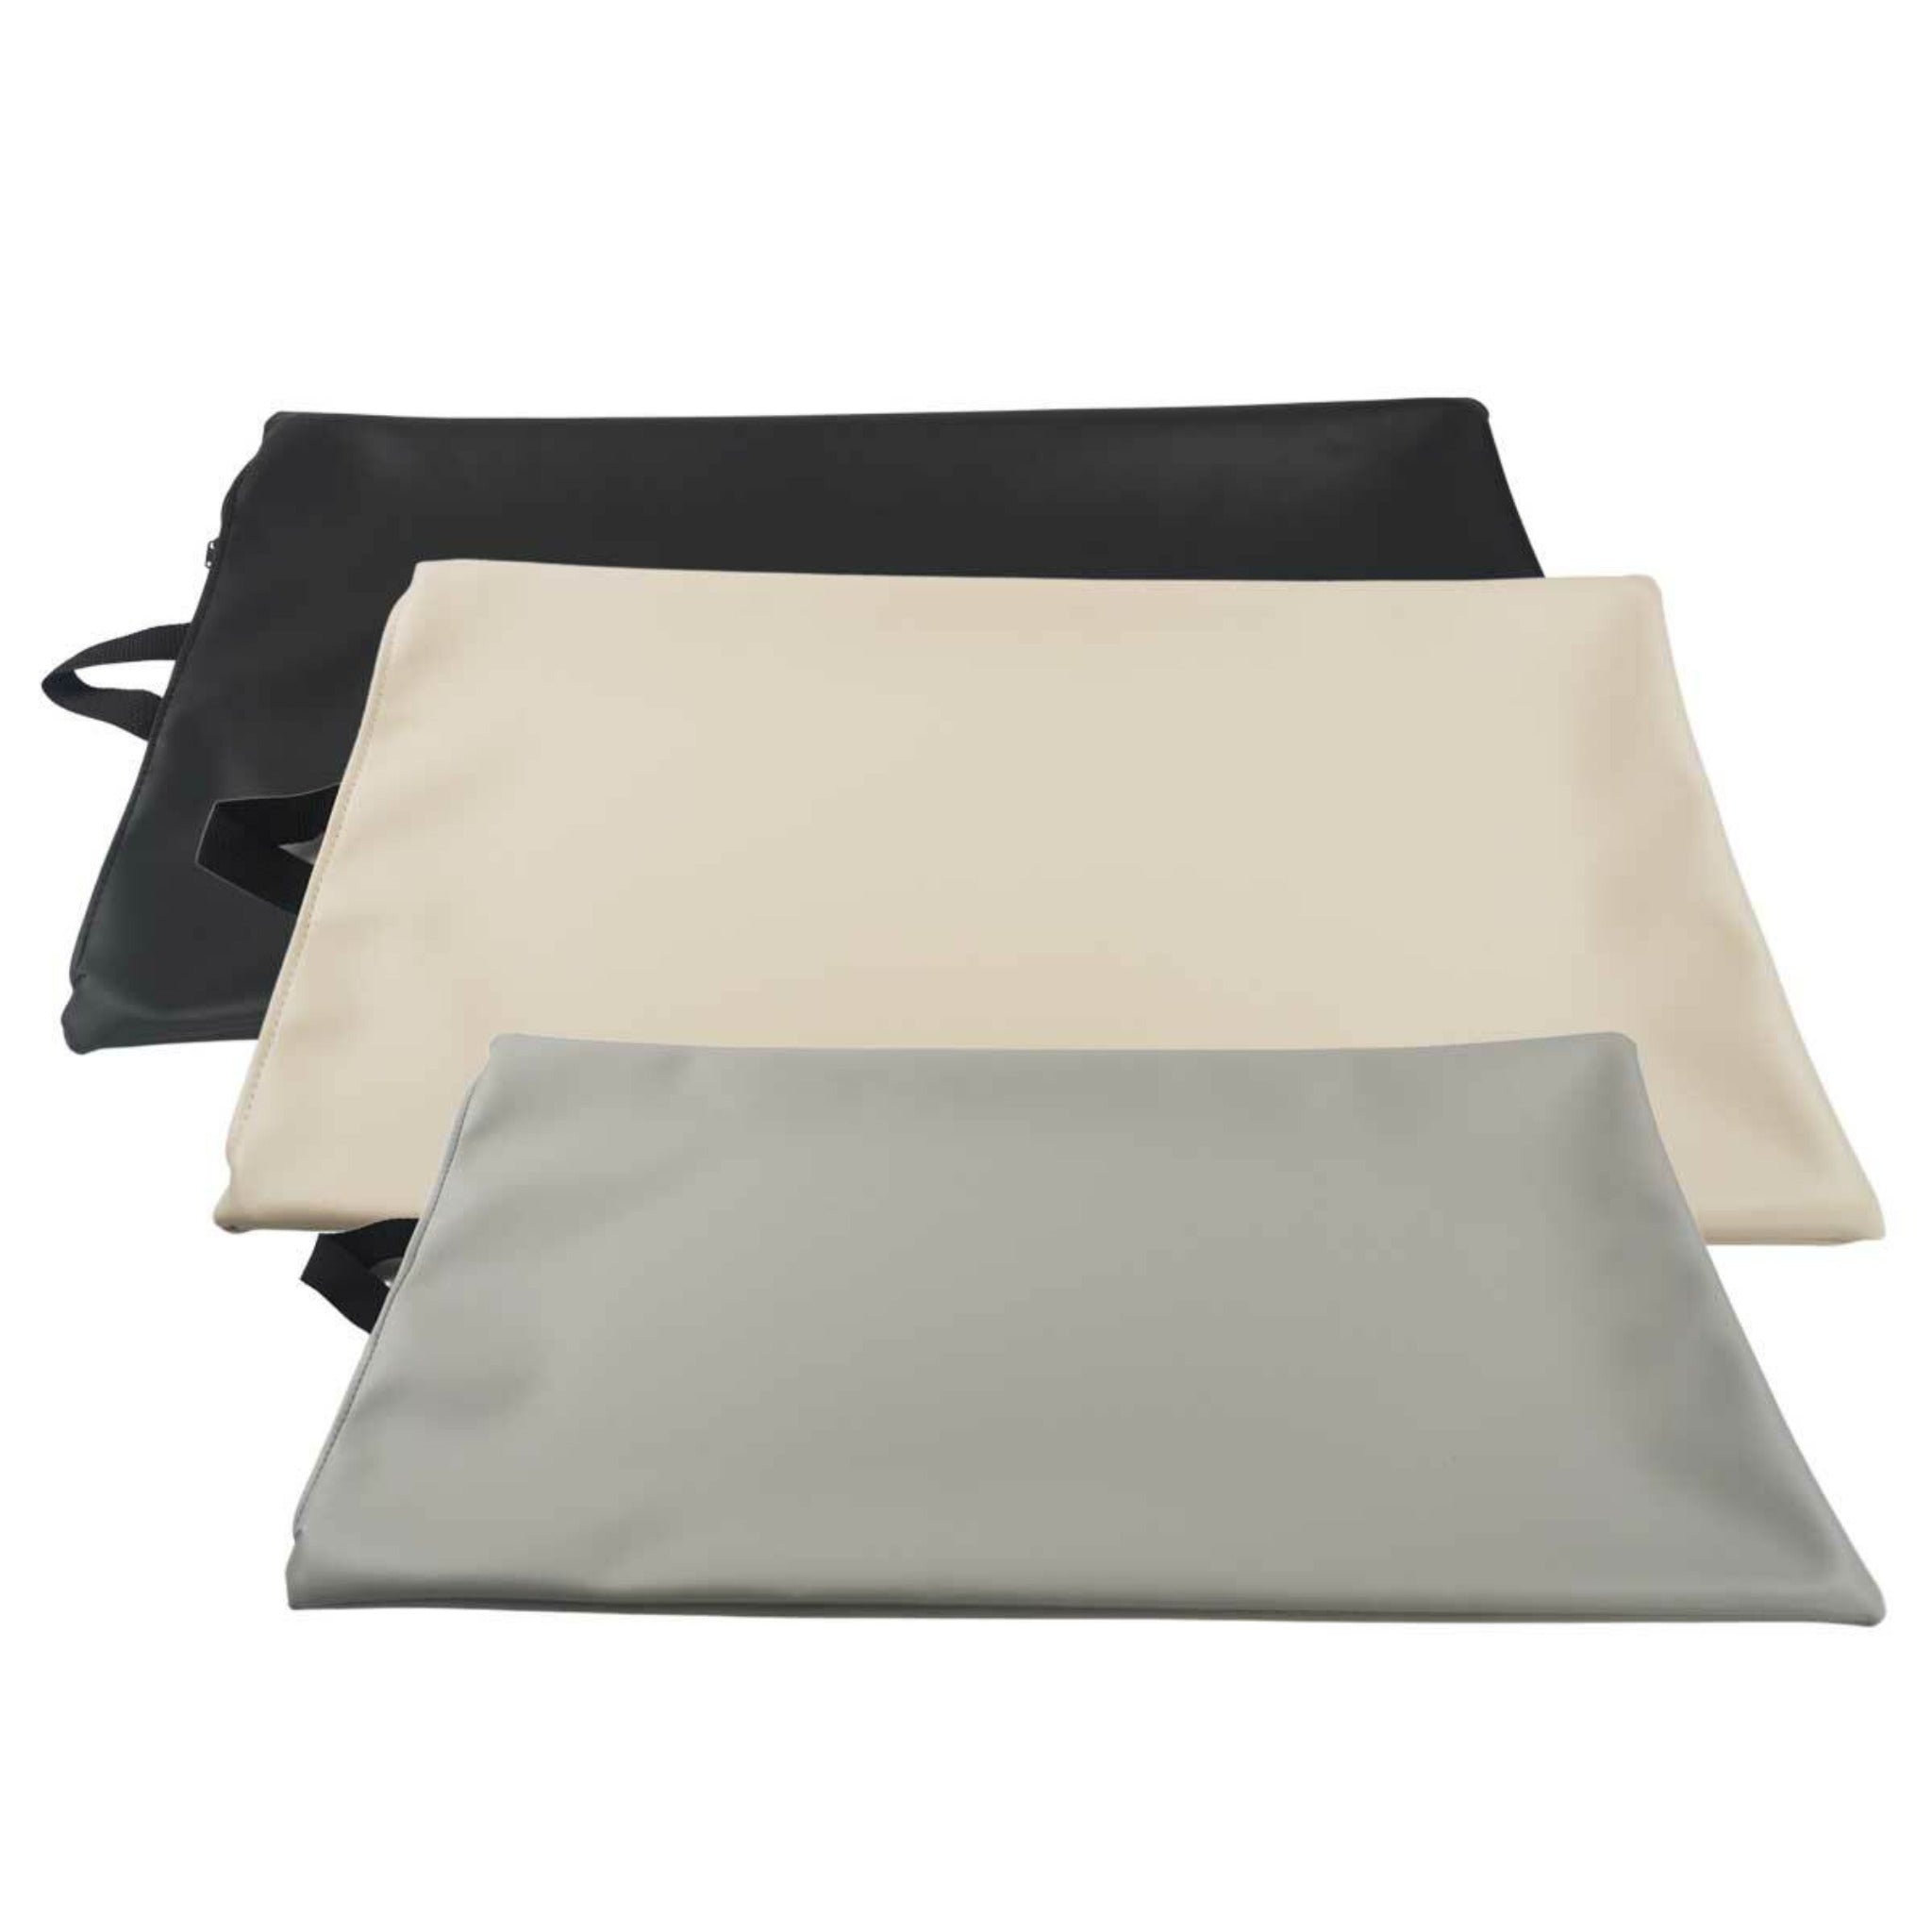 Vinyl Heating Pad Cover Protector